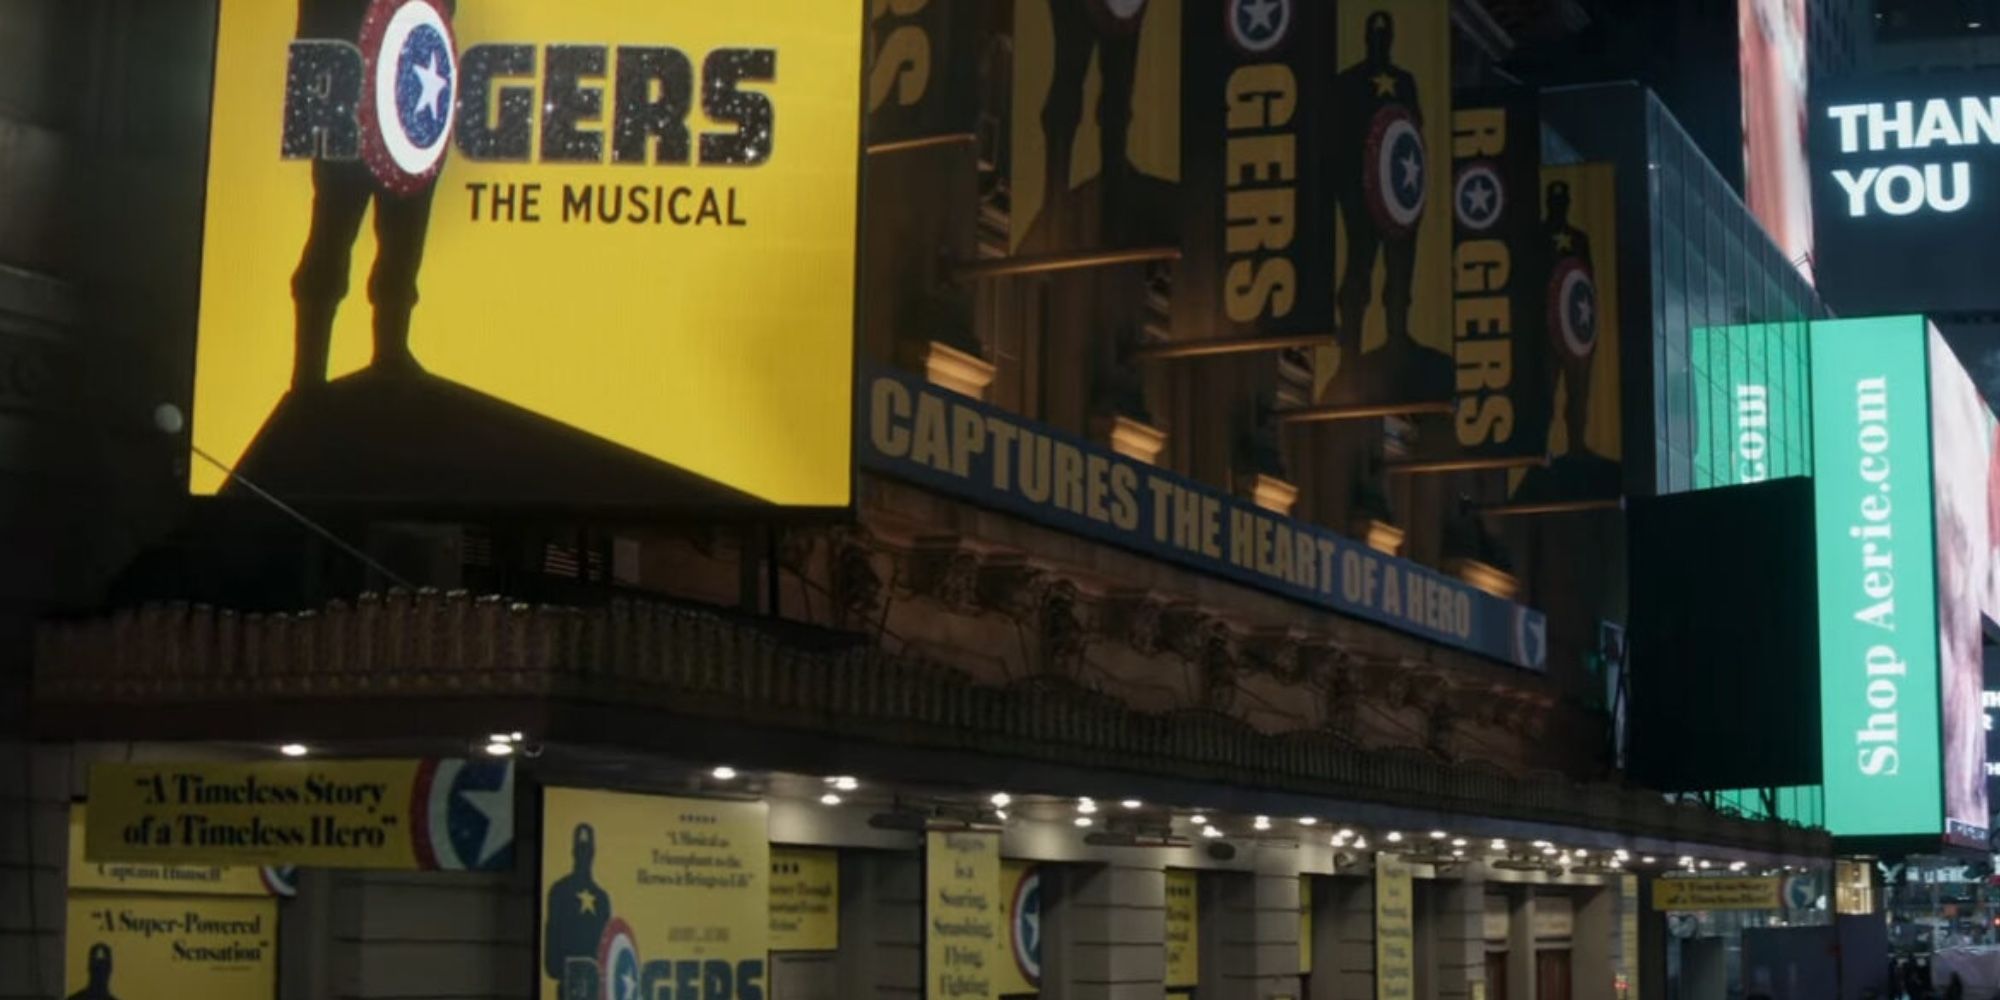 The sign for Rogers The Musical in Hawkeye